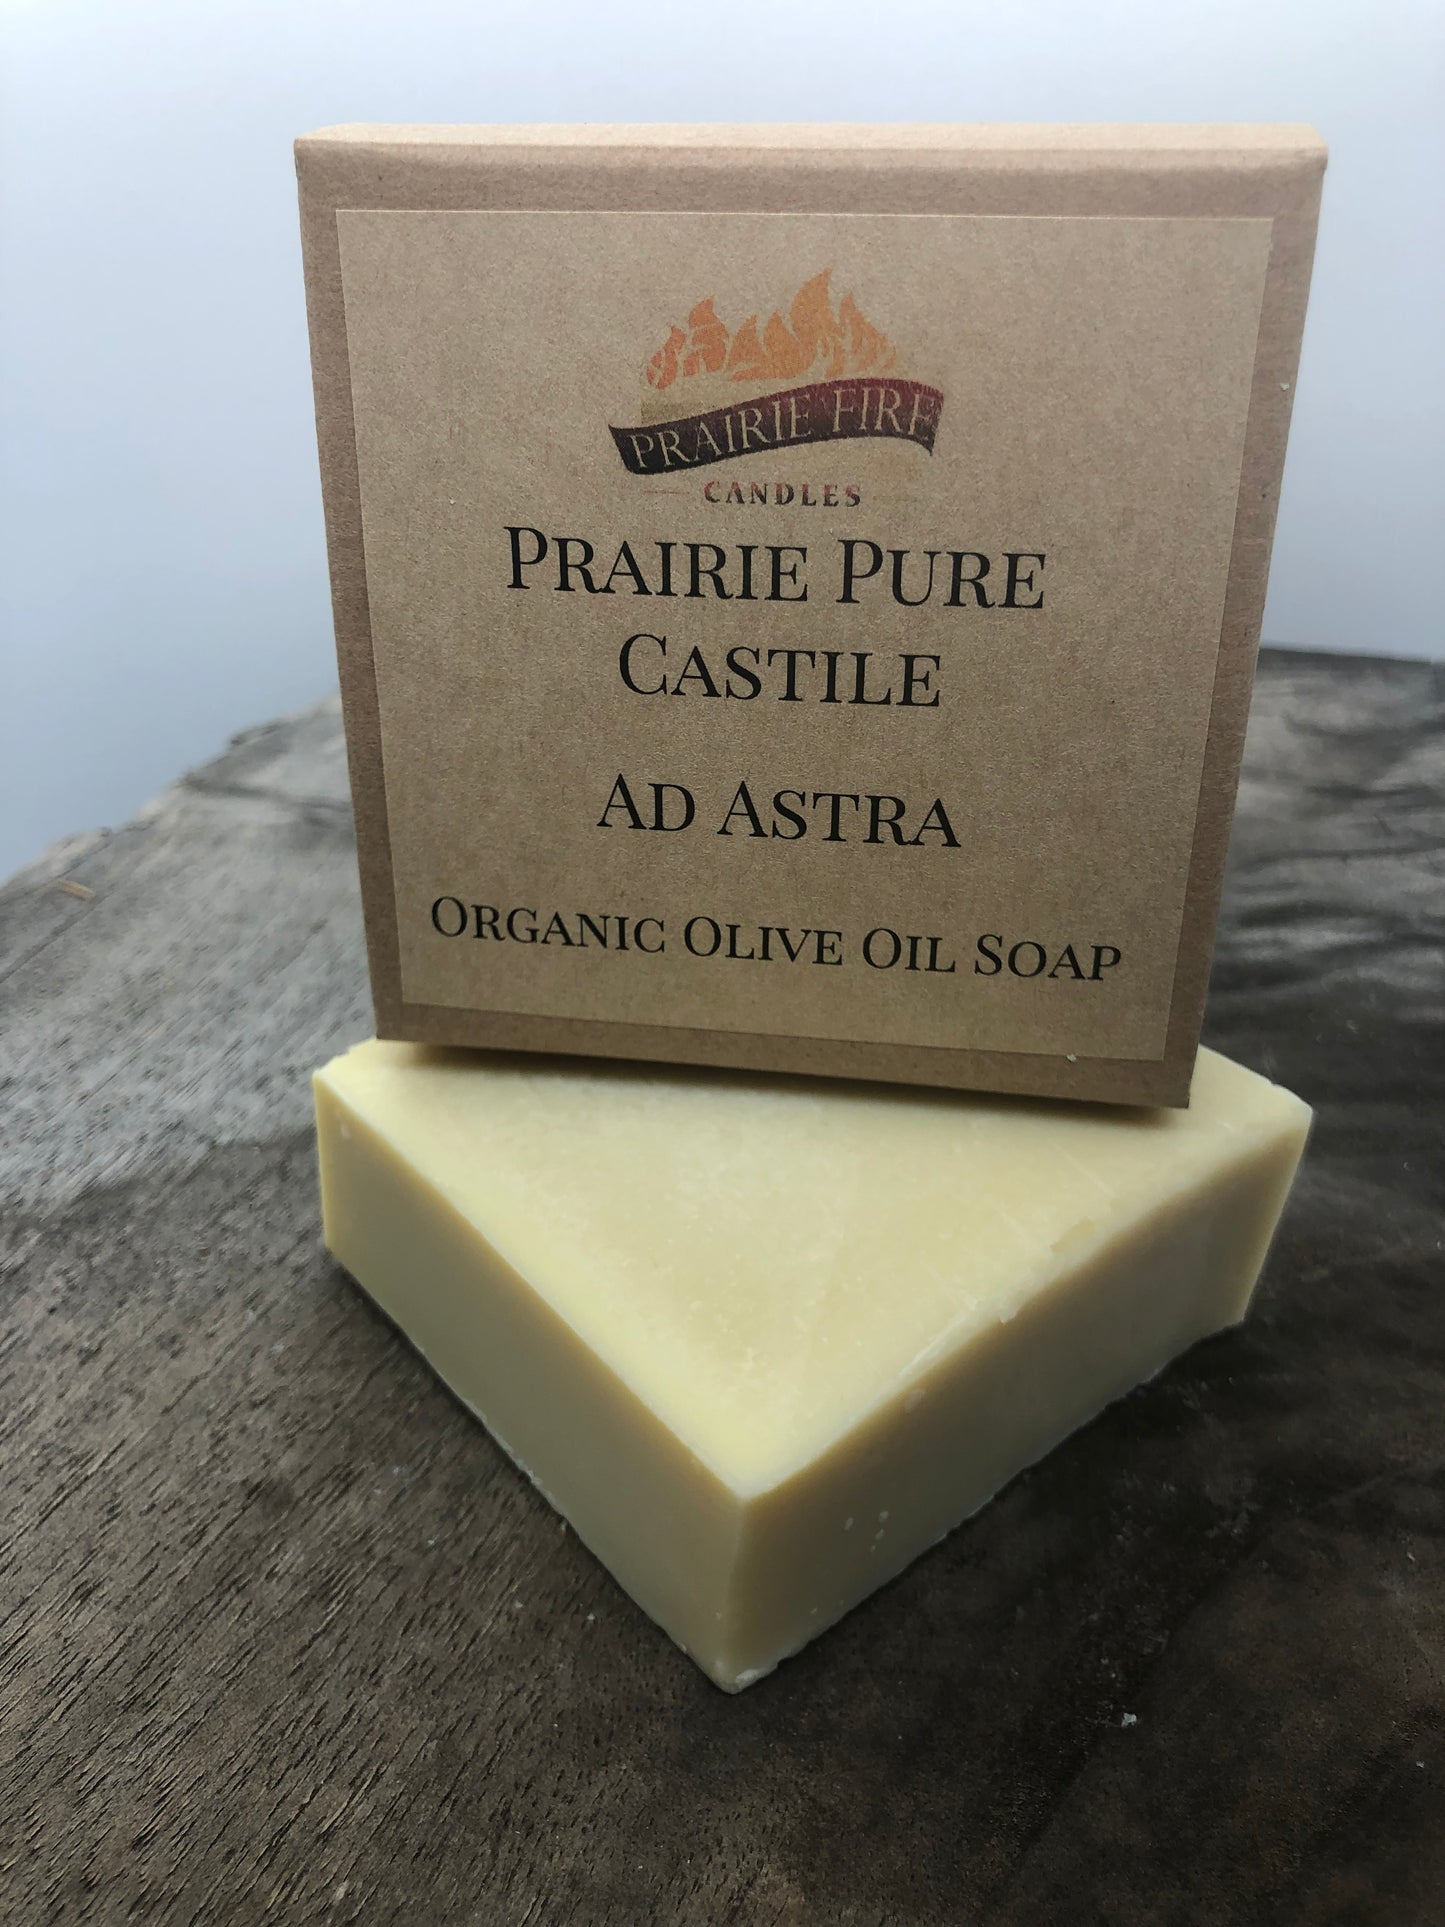 Ad Astra Real Castile Organic Olive Oil Soap for Sensitive Skin - Dye Free - 100% Certified Organic Extra Virgin Olive Oil - Prairie Fire Candles